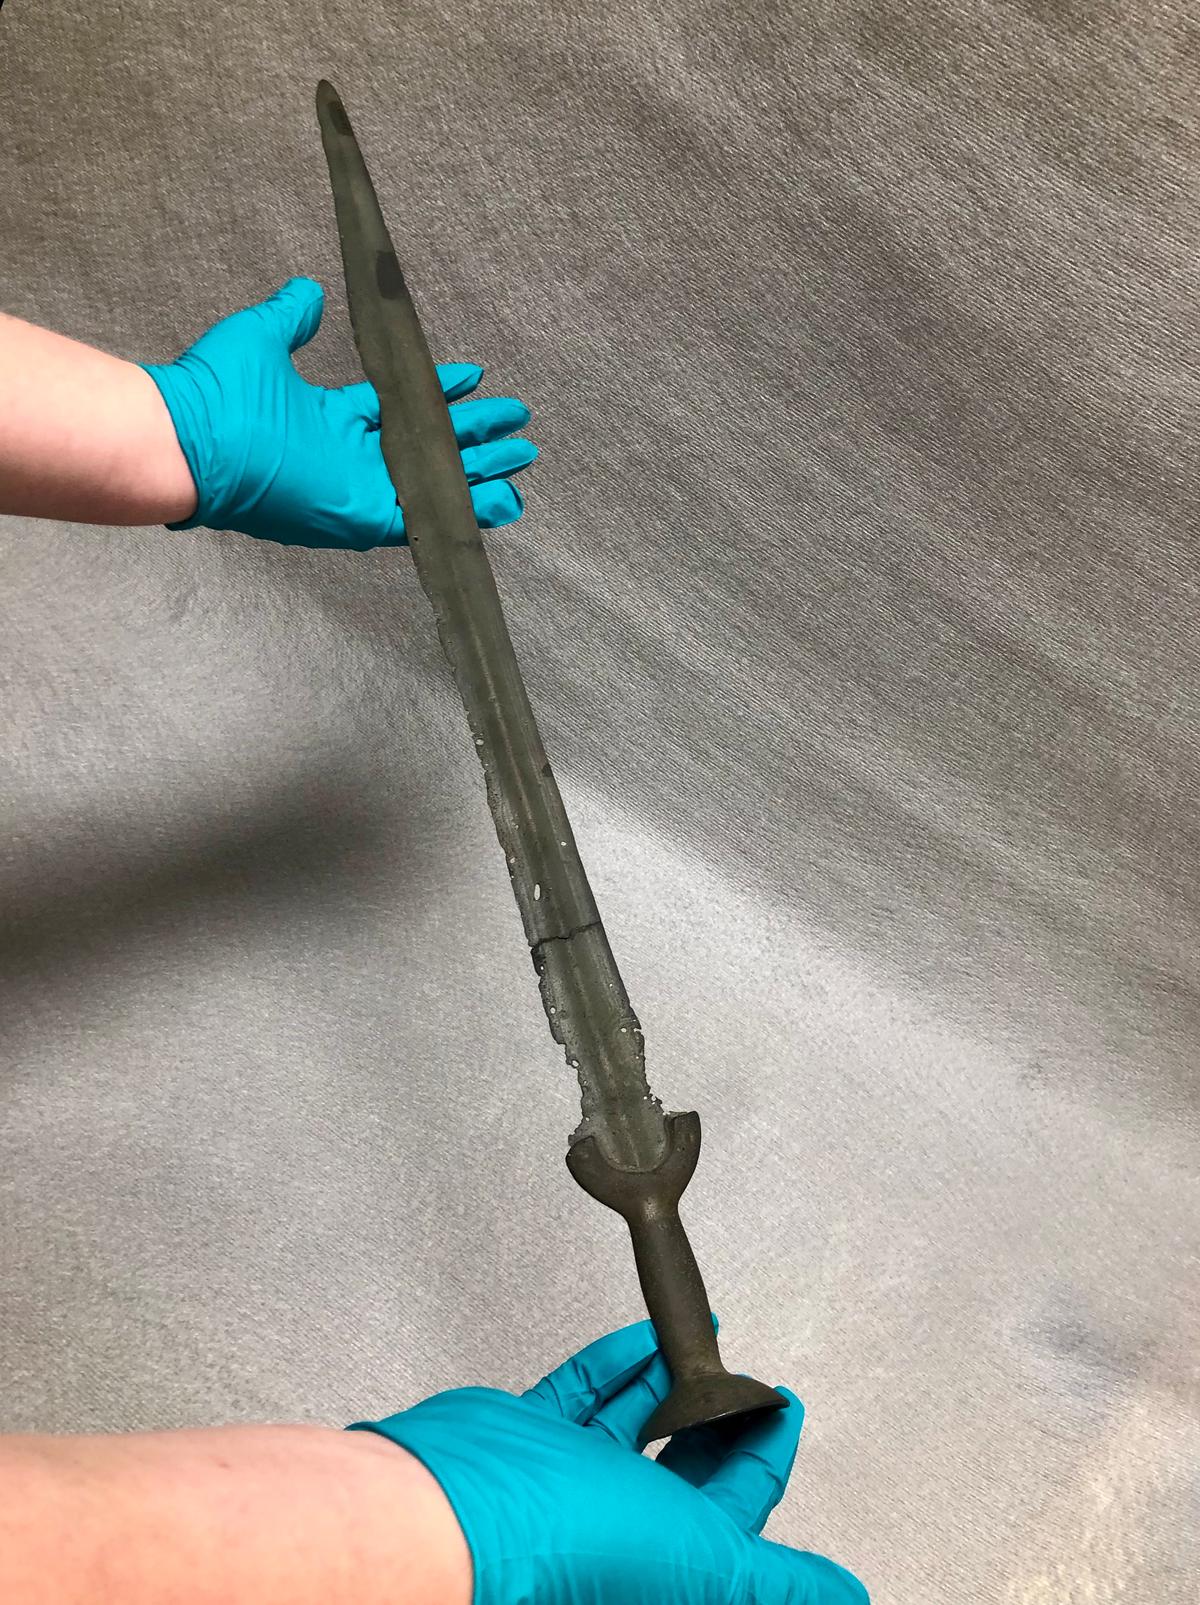 This Bronze Age sword (1080-900 BC) was retrieved from the Danube River in Budapest, Hungary, in the 1930s. It came into the collection nearly 100 years ago and was thought to be a well-made replica, but a new analysis of the sword revealed that it is the real deal, dating back 3,000 years to the Bronze Age. (Courtesy of The Field Museum of Natural History)